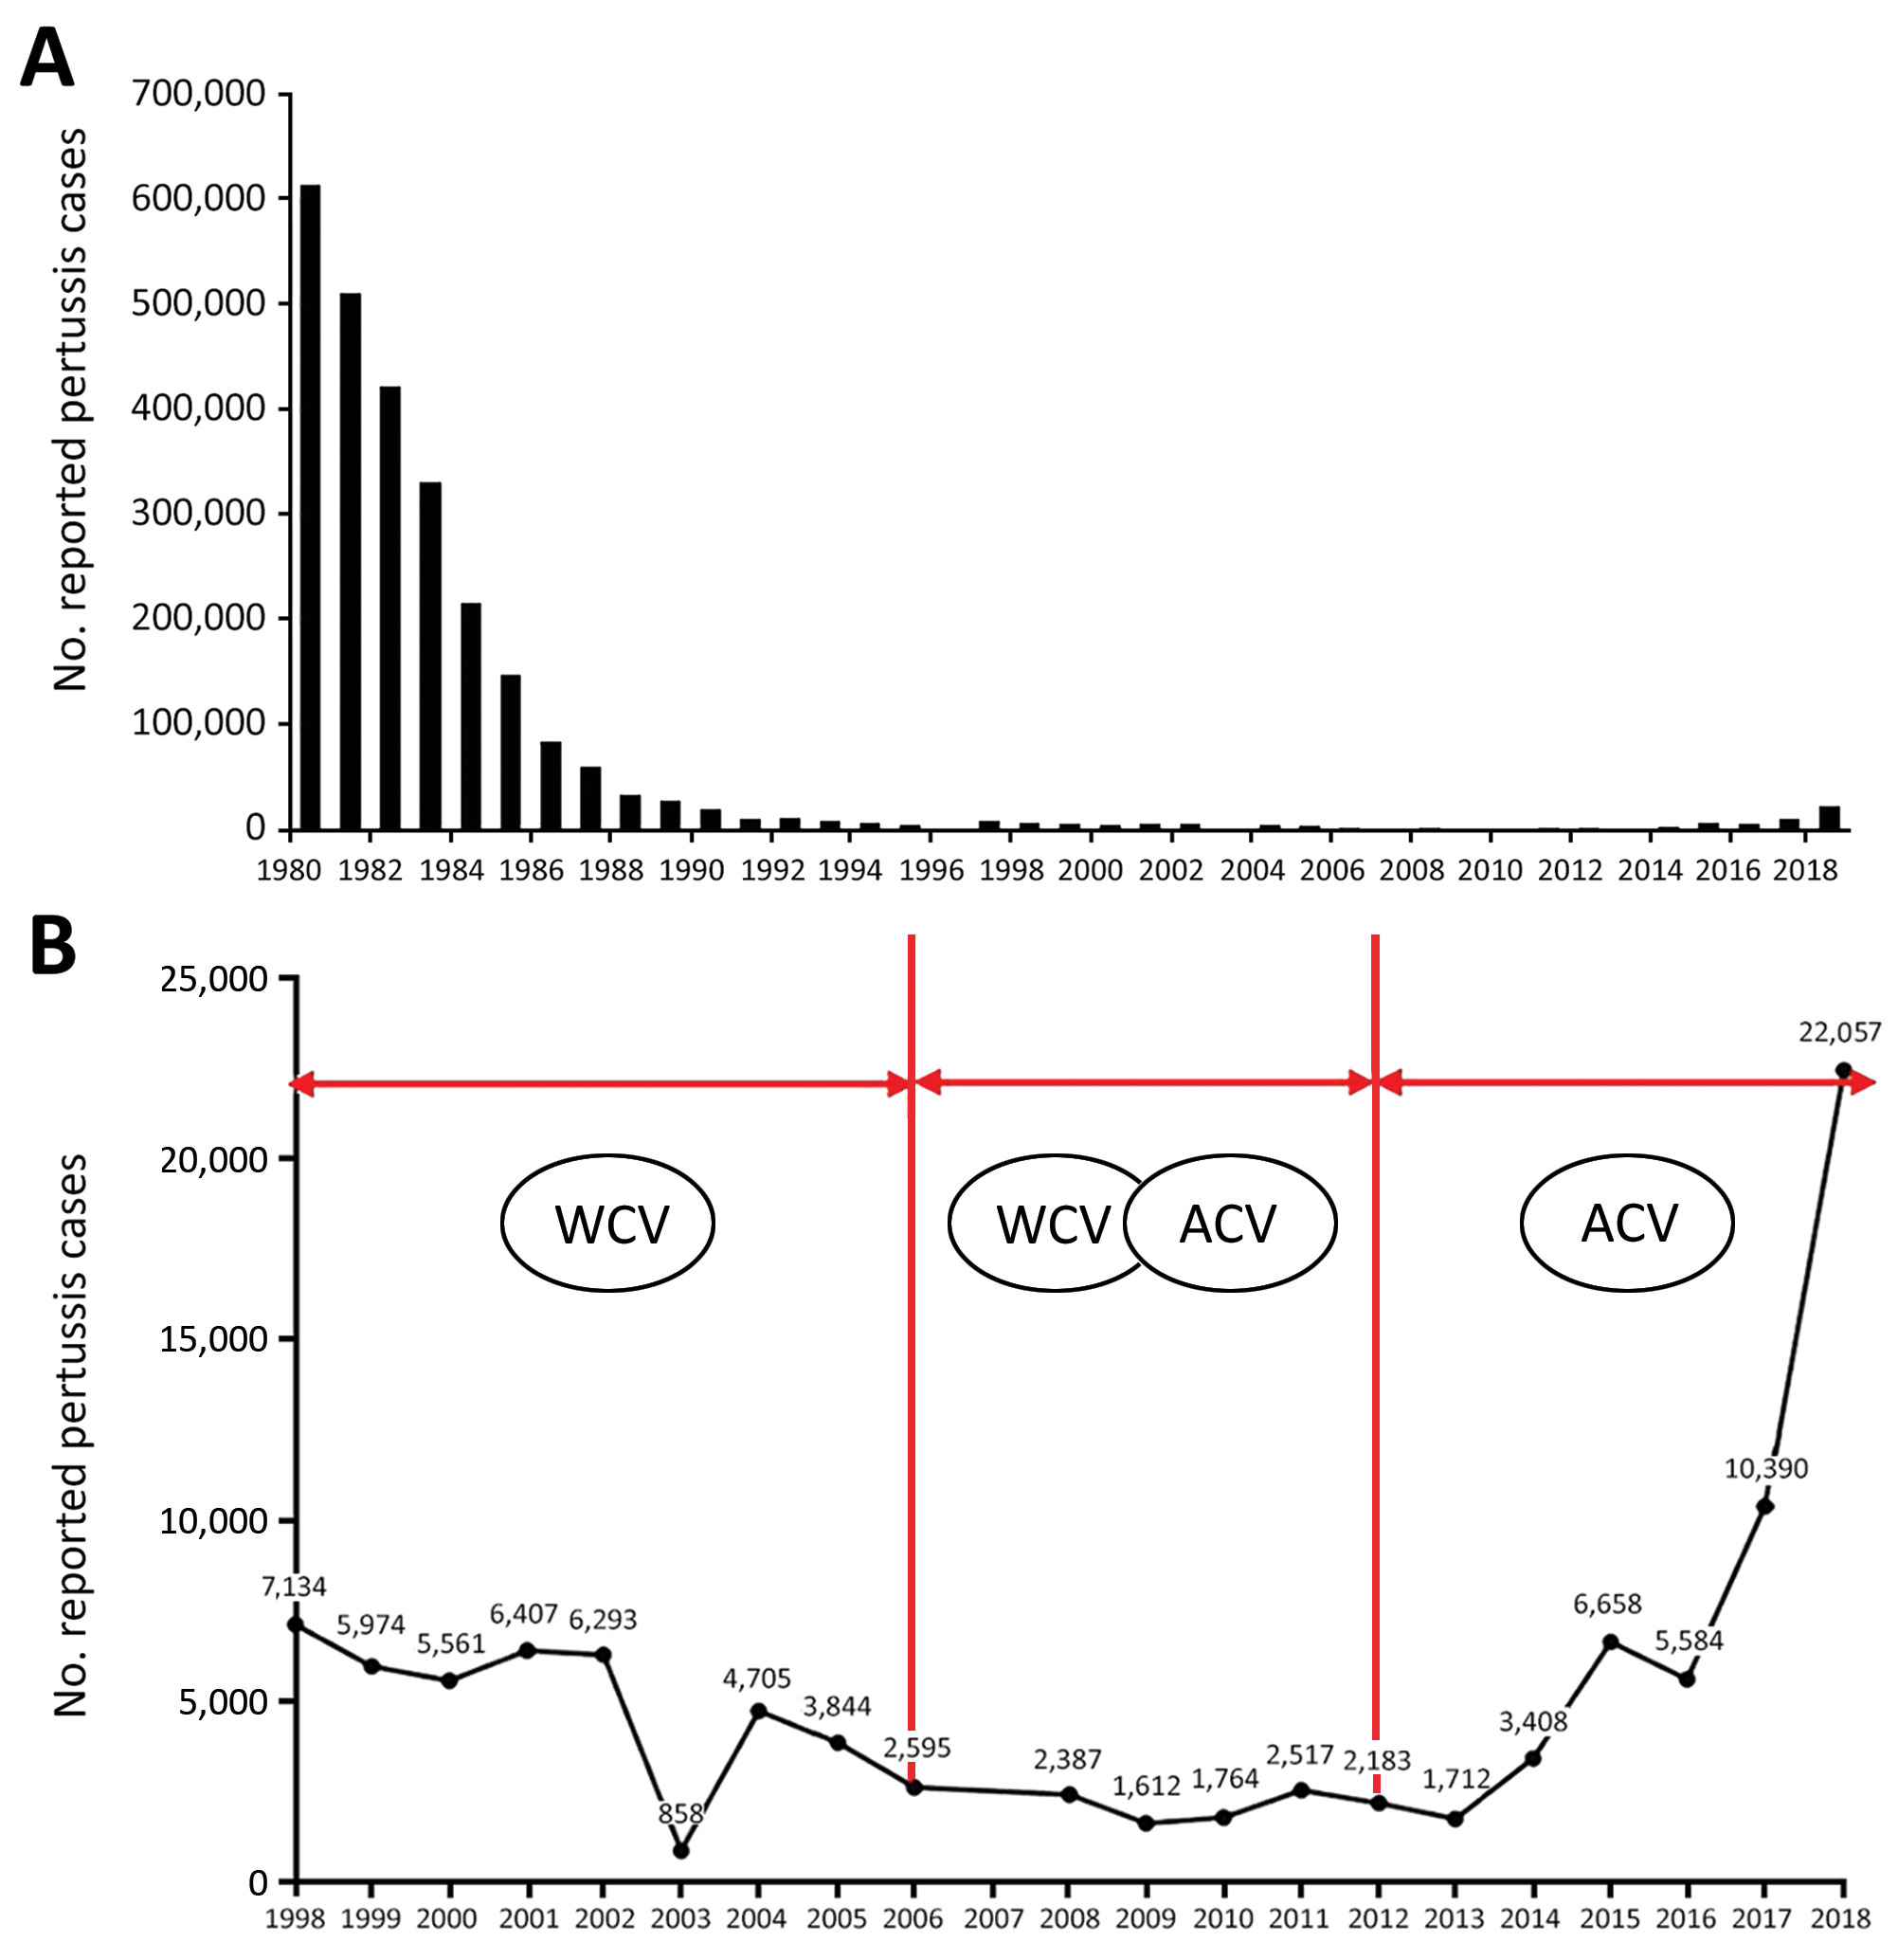 Reported pertussis cases in China, 1980–2018. A) Number of cases 1980–2018. B) Actual numbers of cases (line) according to vaccine type administered during a given period, 1998–2018. ACV, acellular pertussis vaccine; WCV, whole-cell pertussis vaccine. 